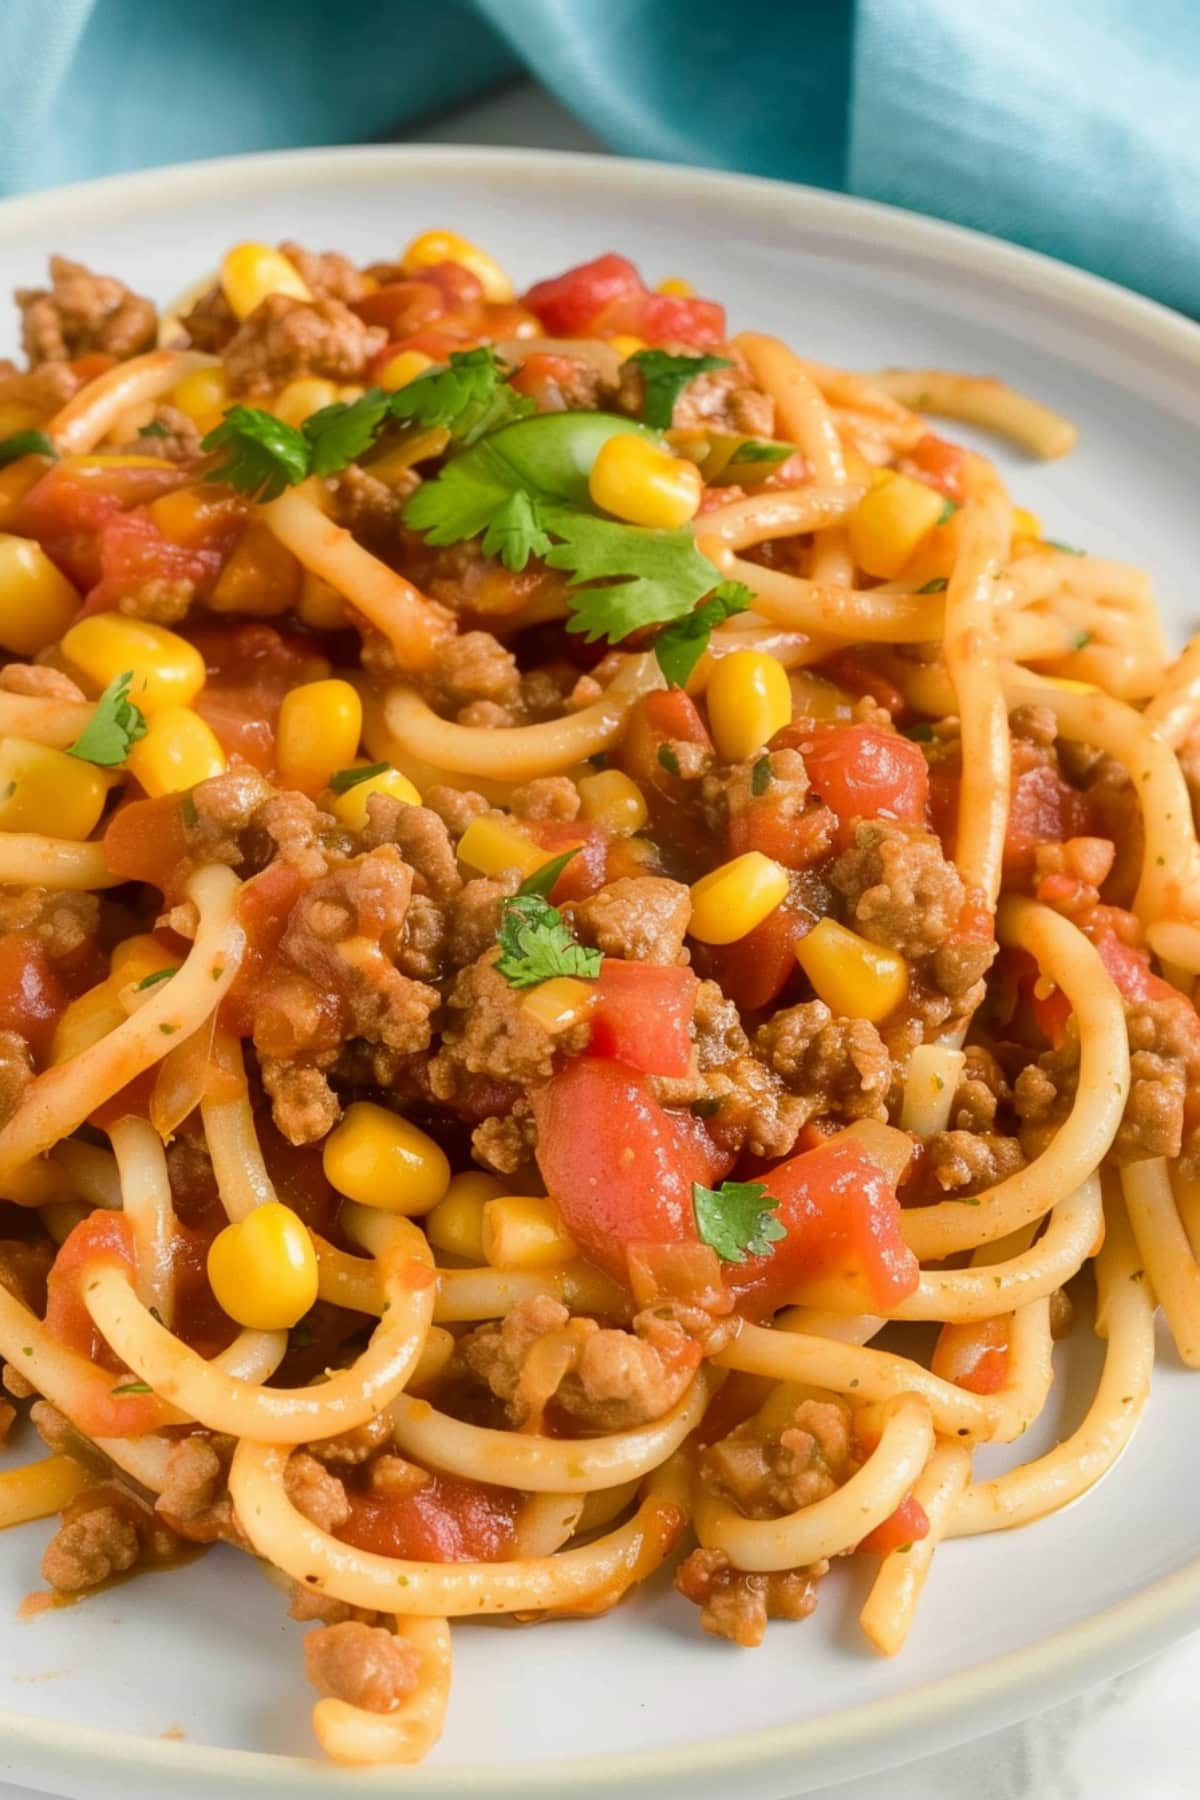 Homemade Mexican-style spaghetti  with corn and ground beef, garnished with cilantro.